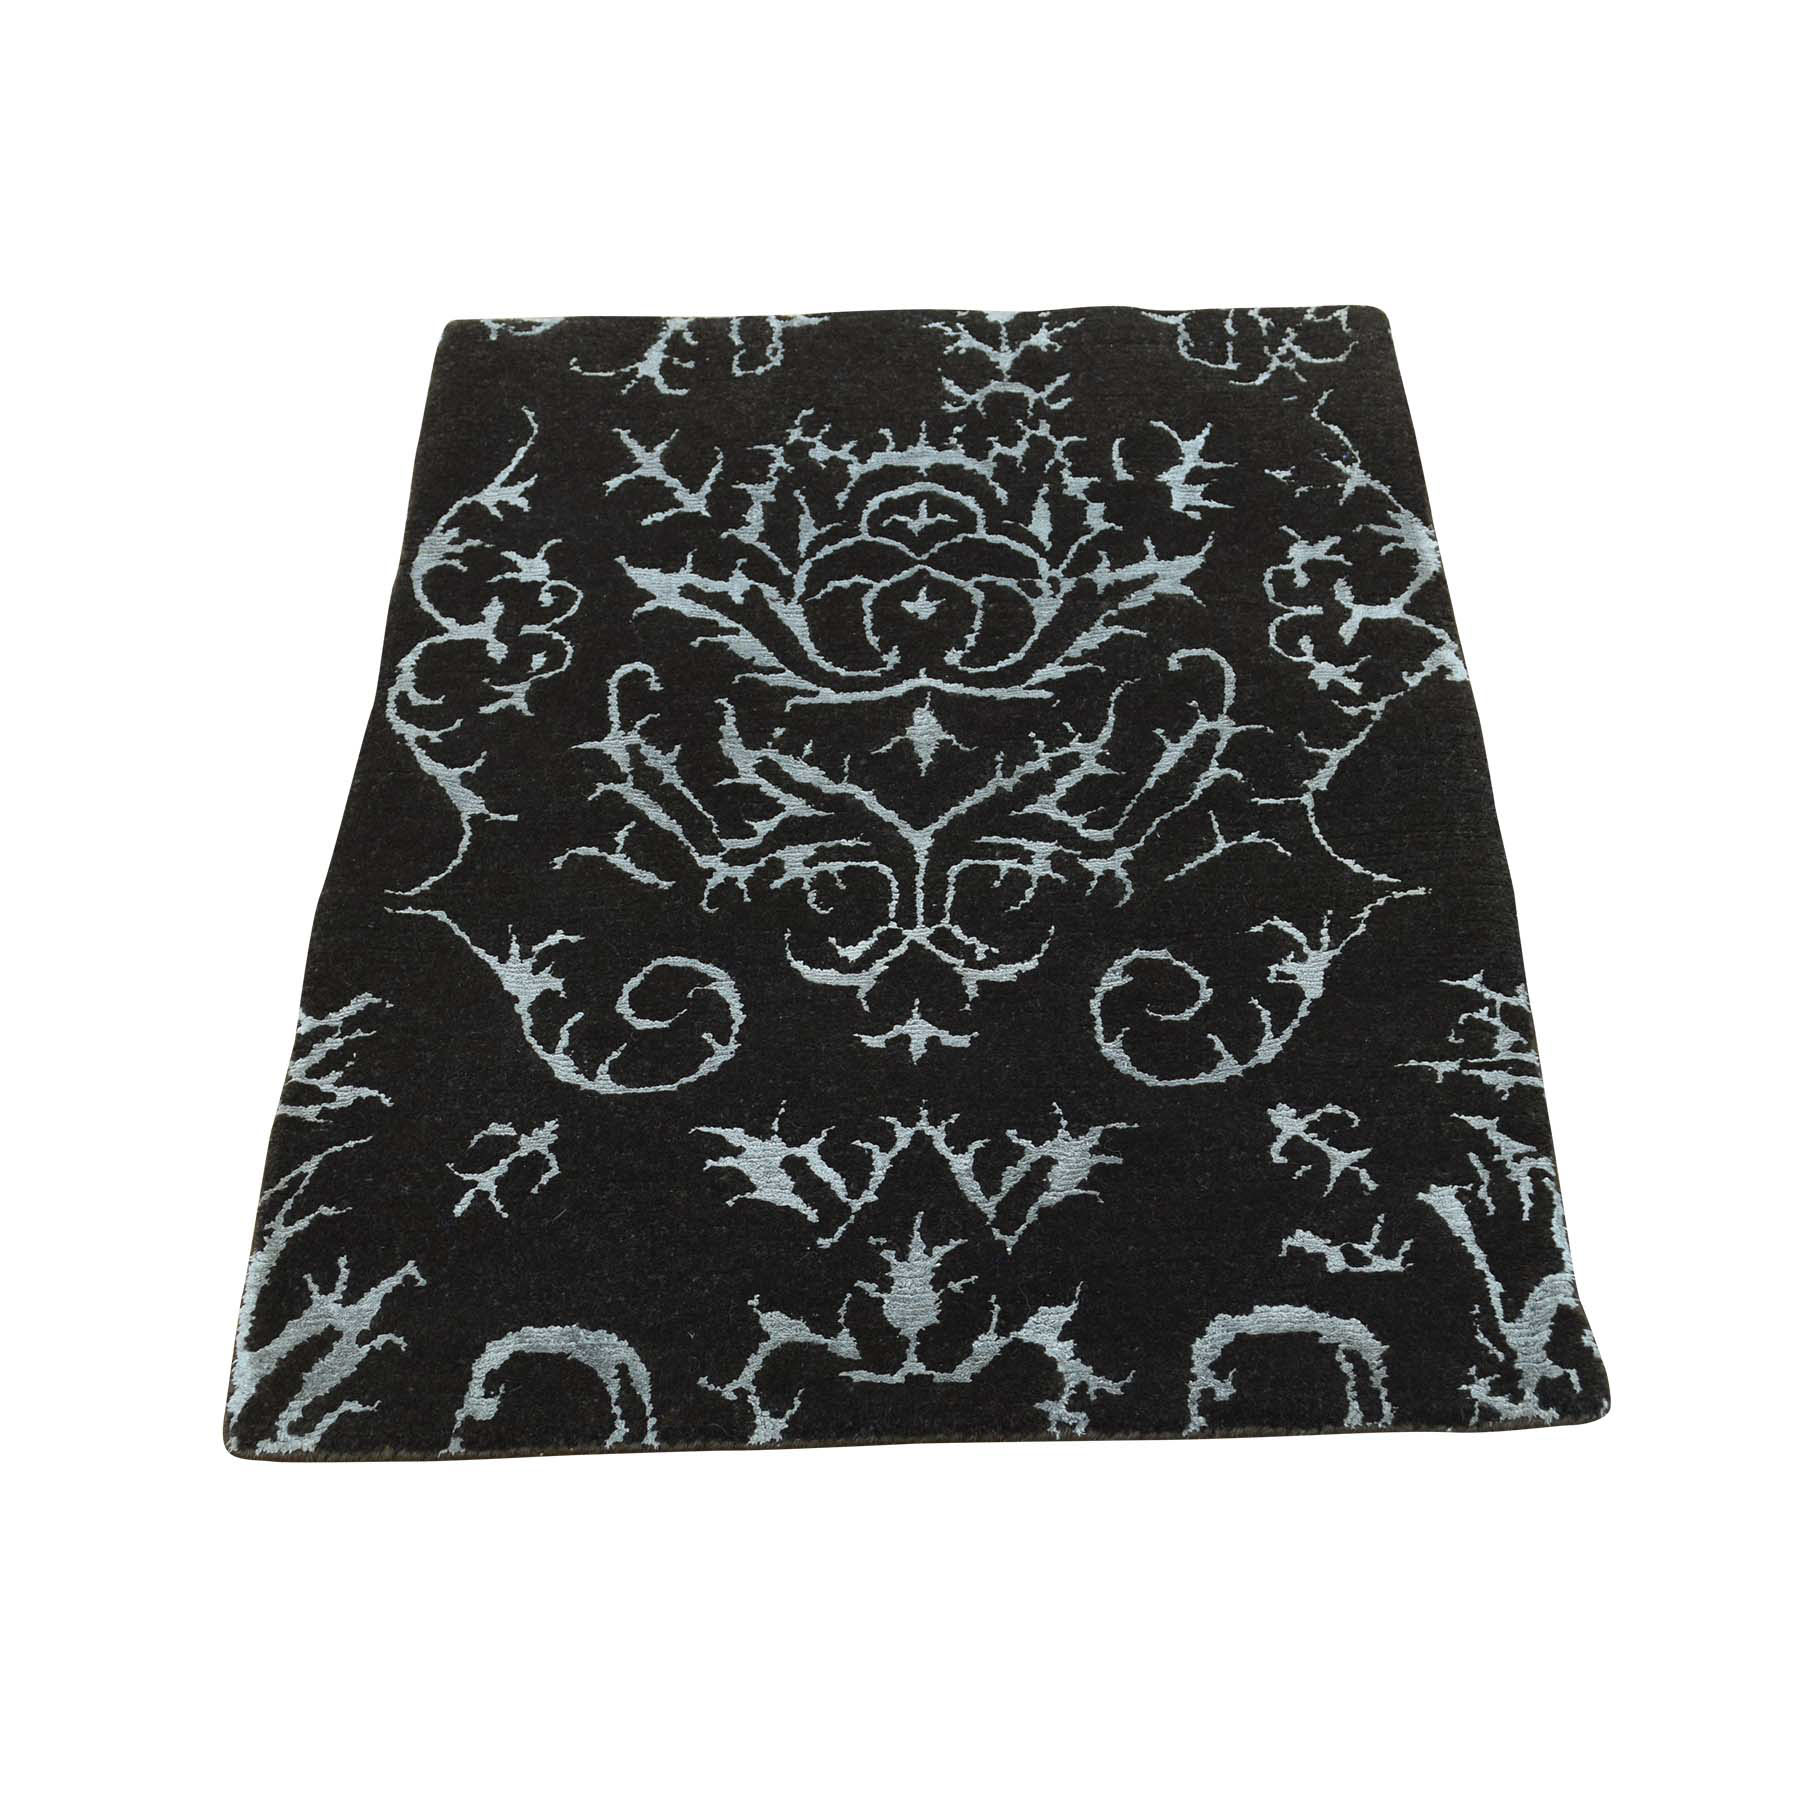 2-x2-10  Modern Wool and Silk Damask Design Hand-Knotted Rug 